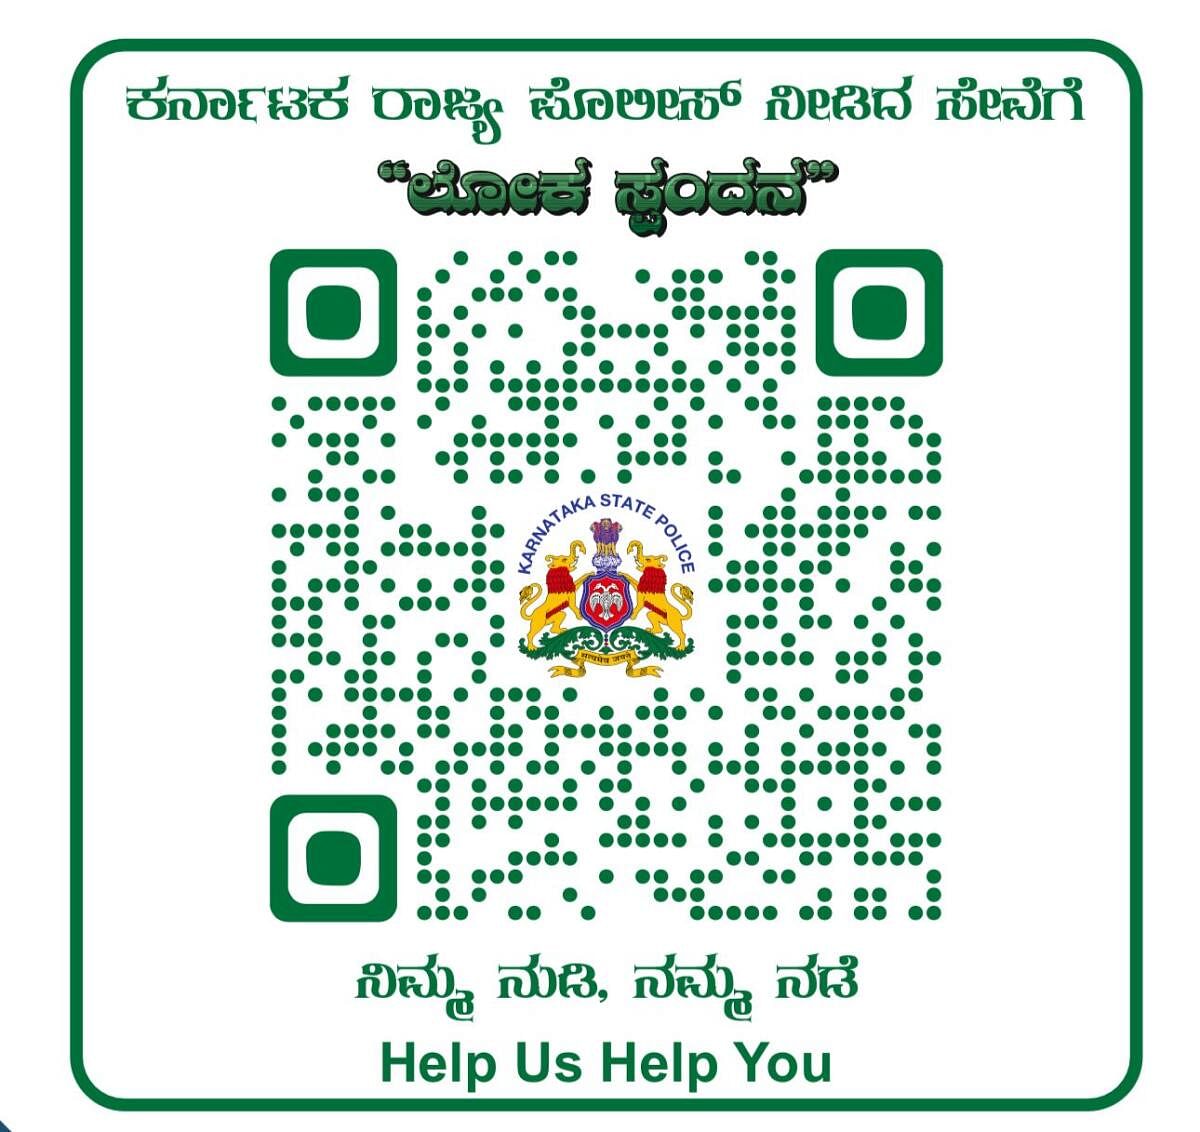 The QR code can be found at 169 police stations.